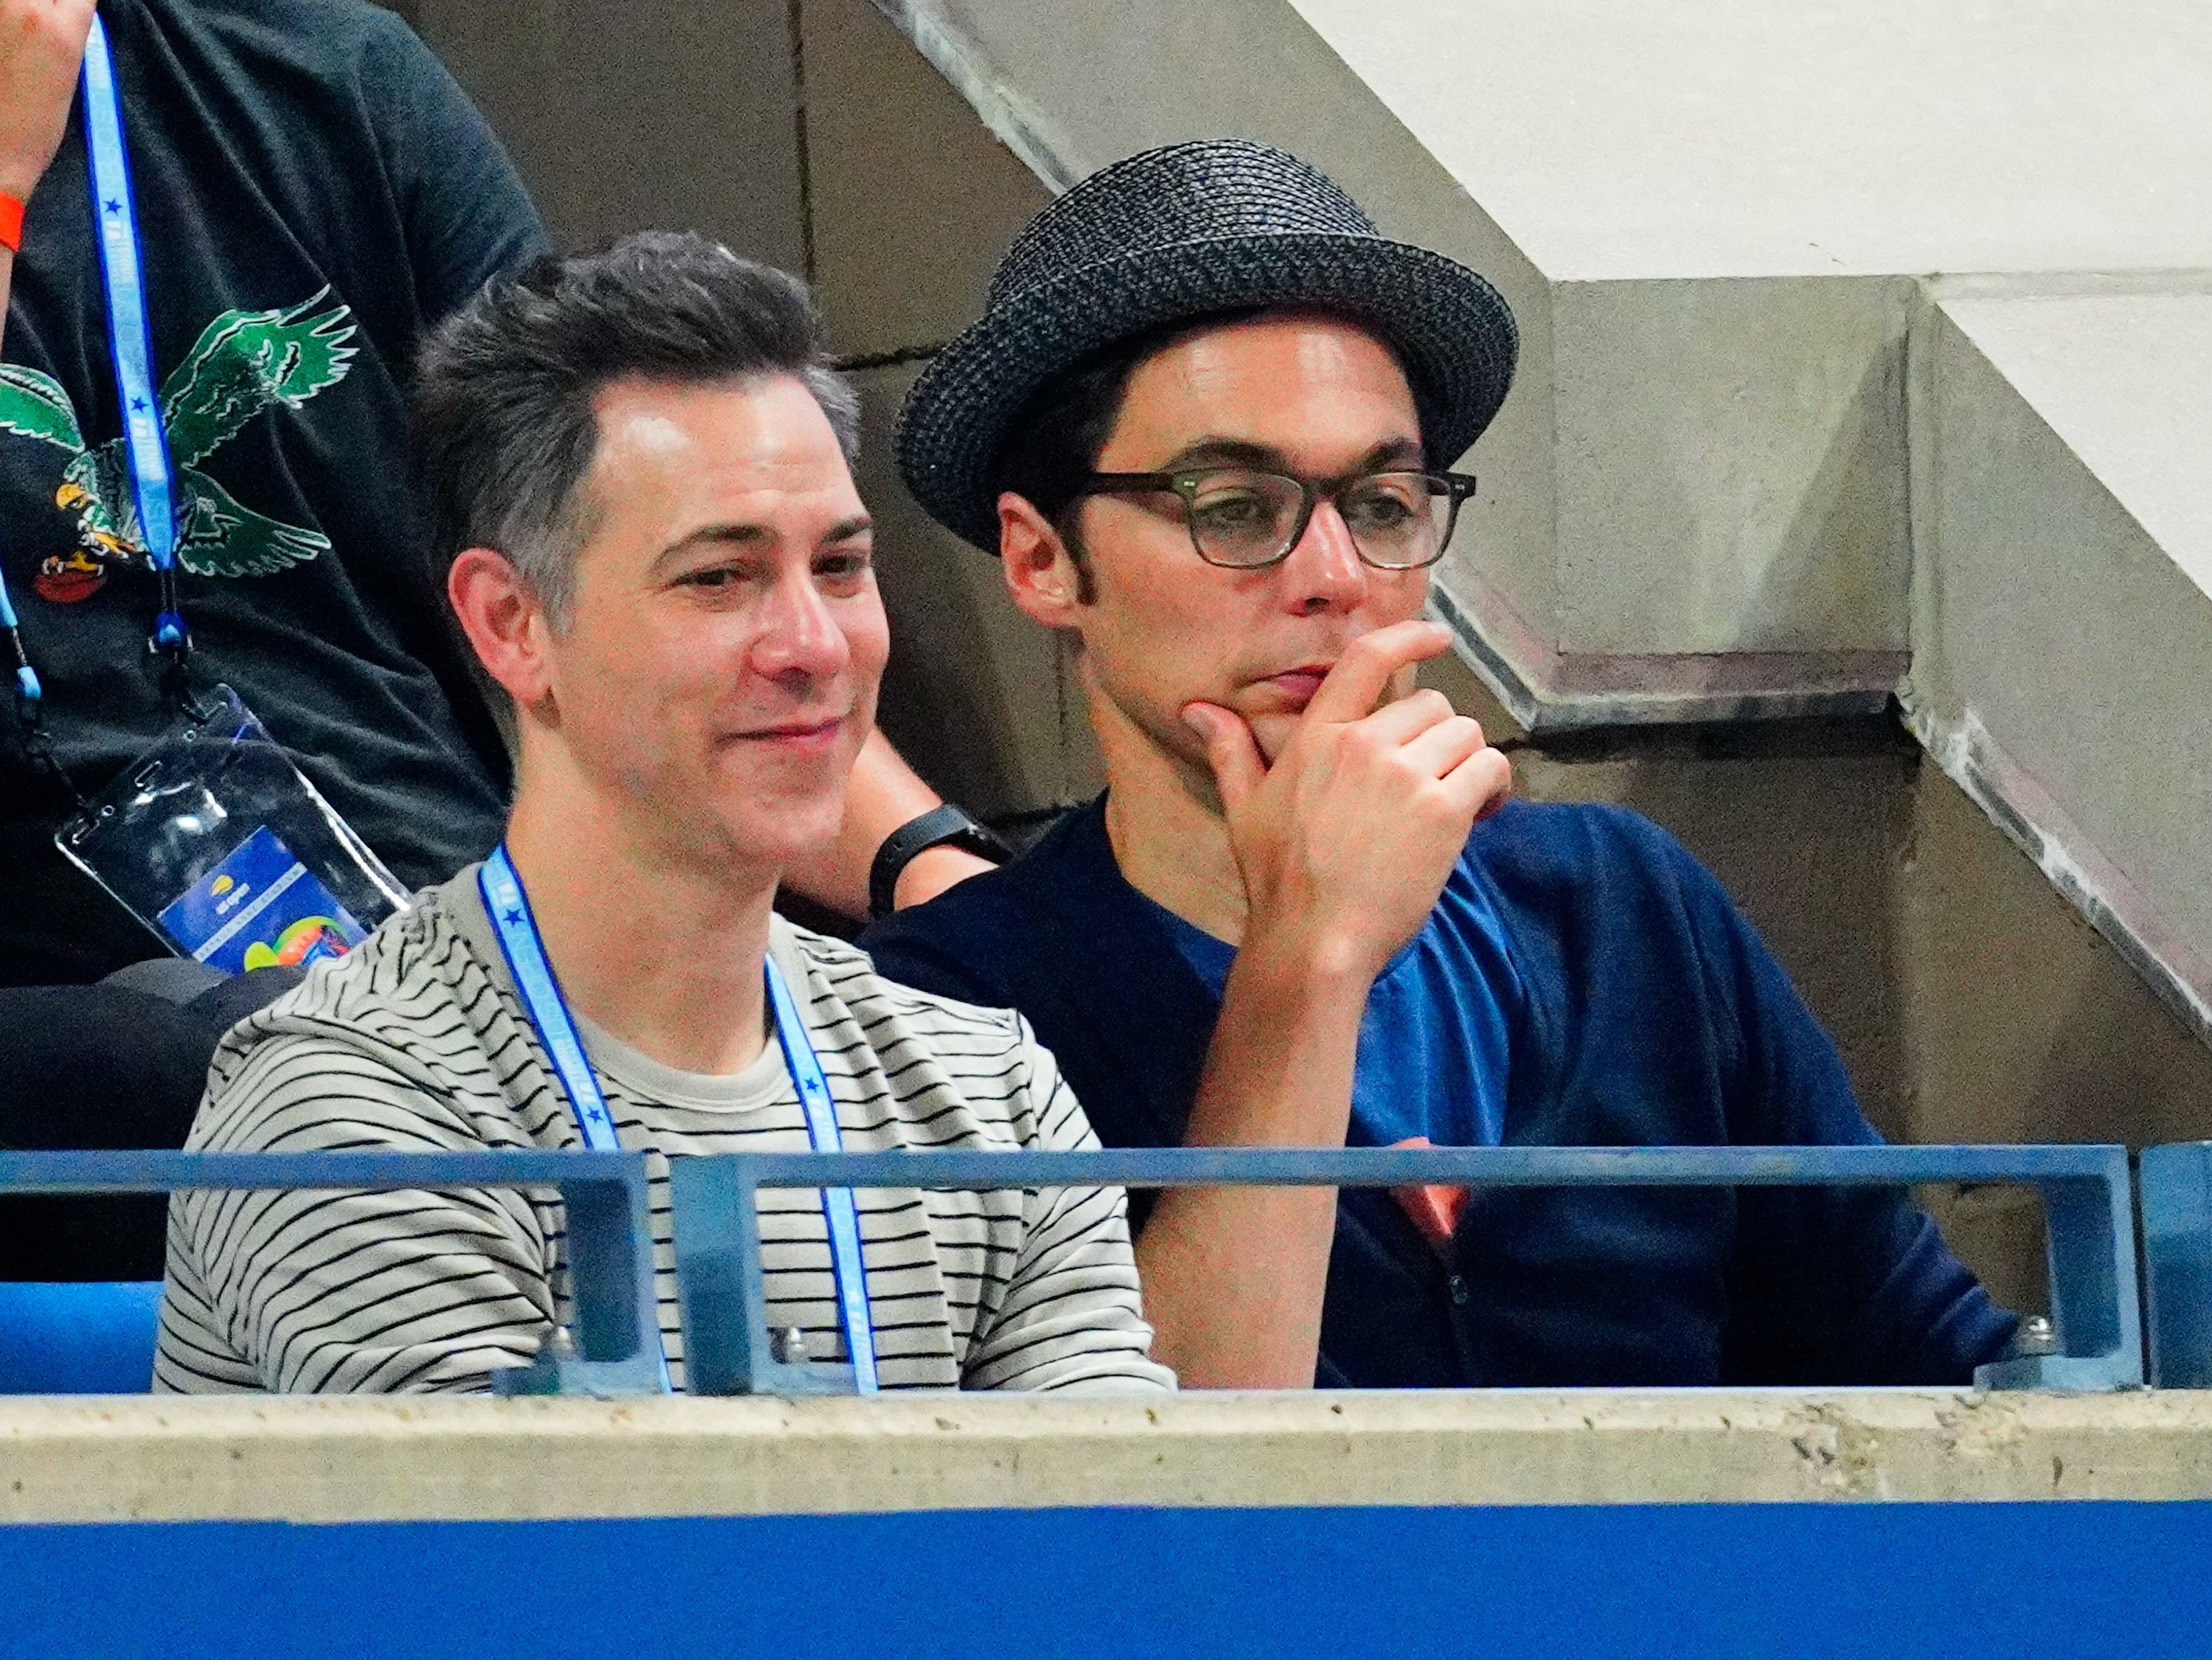 Todd Spiewak and Jim Parsons